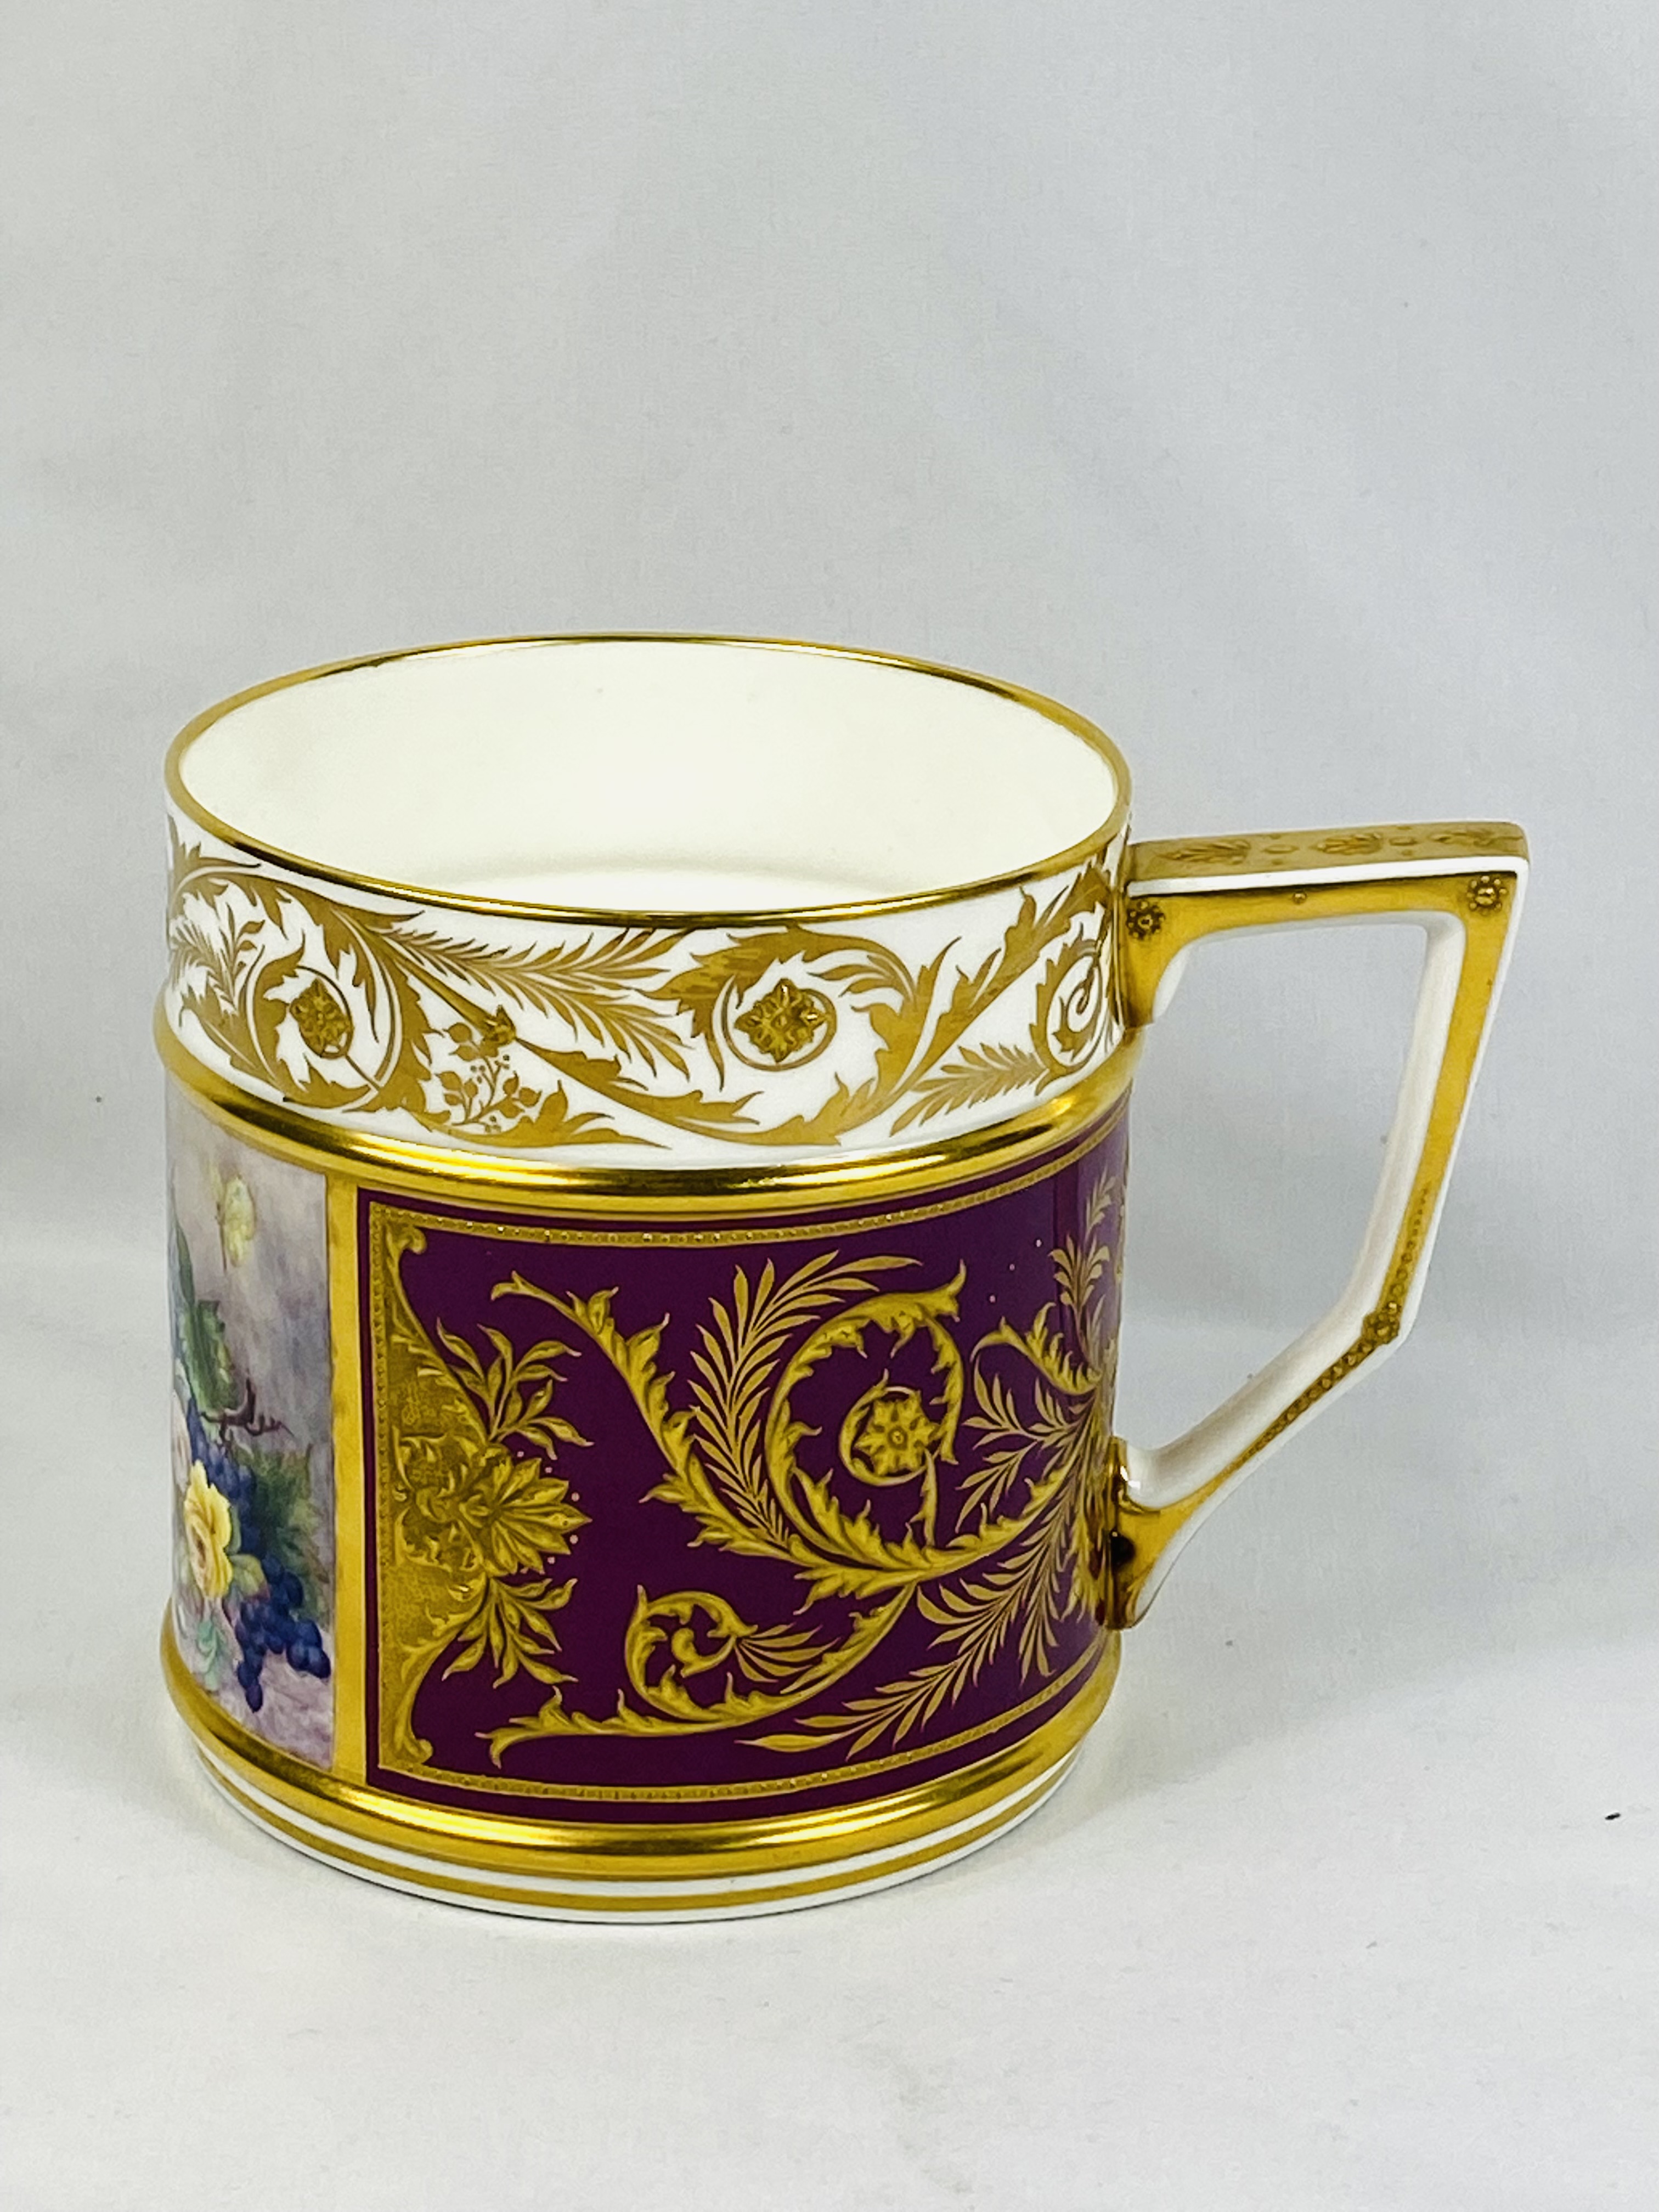 Hand painted porcelain tankard - Image 3 of 4